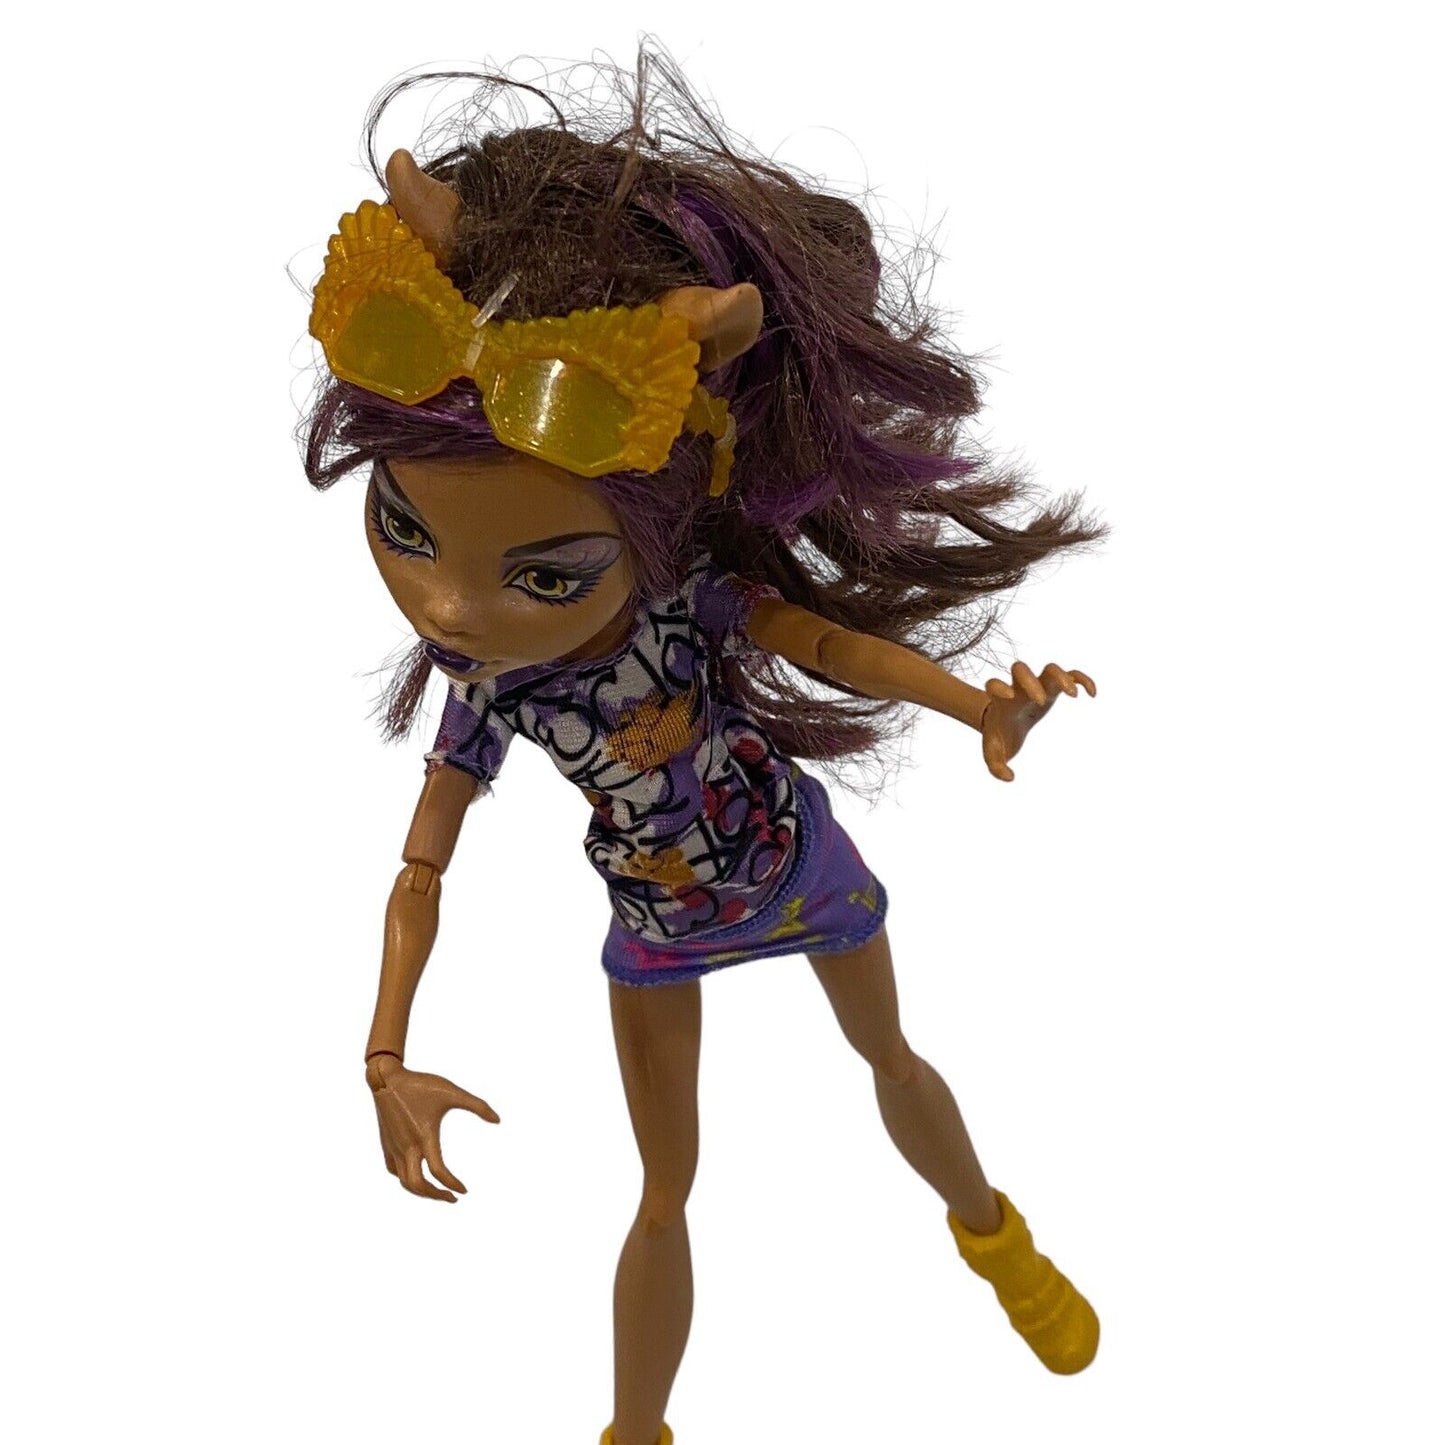 2008 Monster High Boo York Frightseers Clawdeen Wolf Doll w/ Sunglasses & Boots